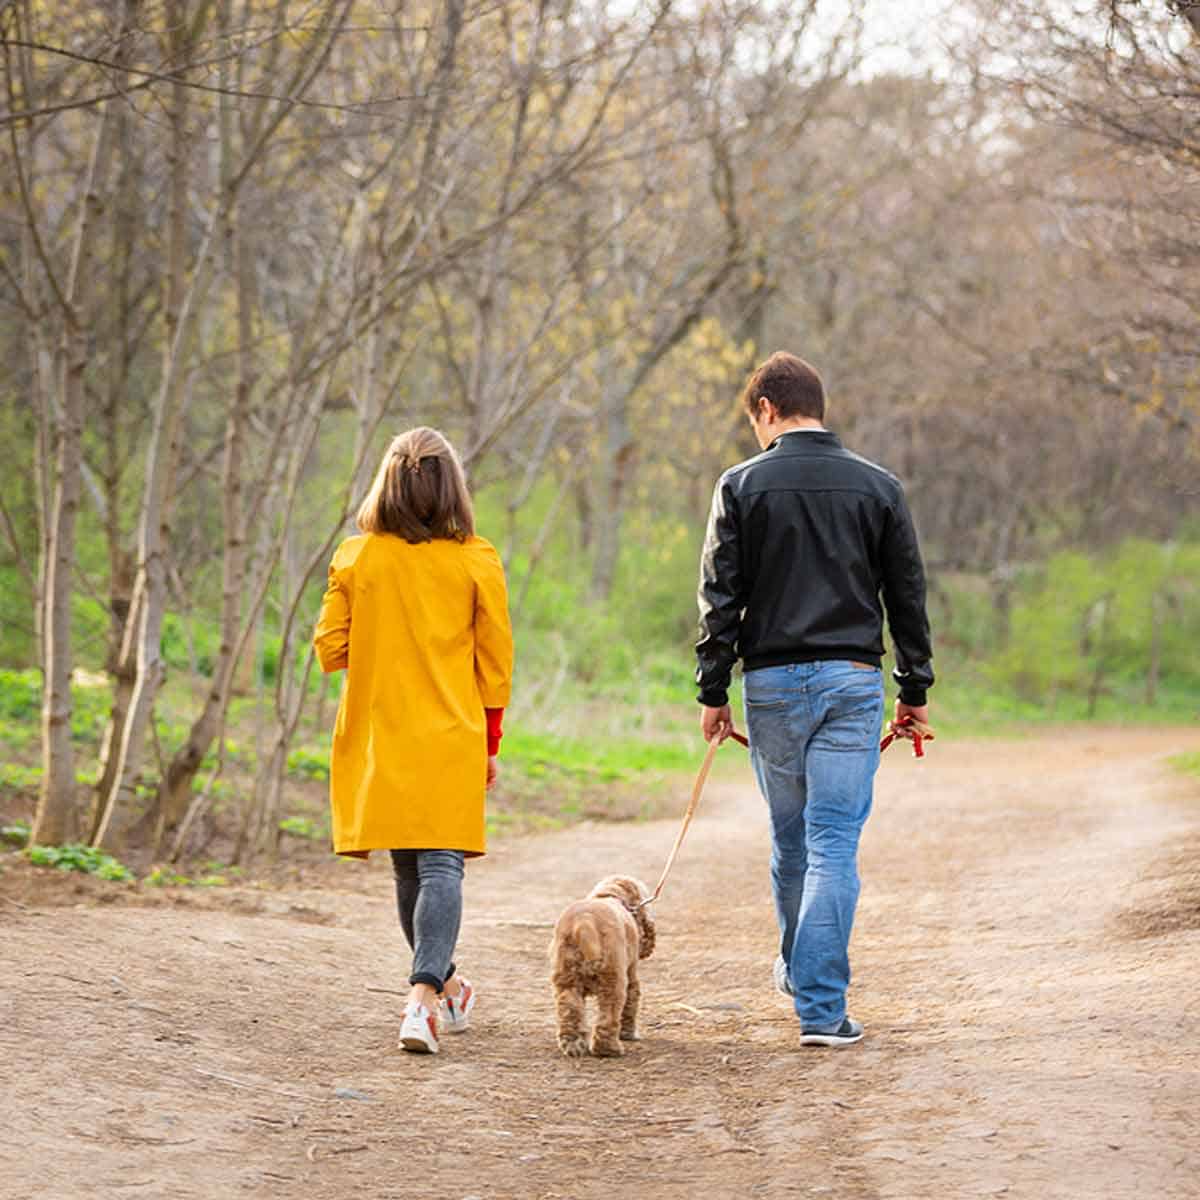 A couple walking on a dirt path with a dog.